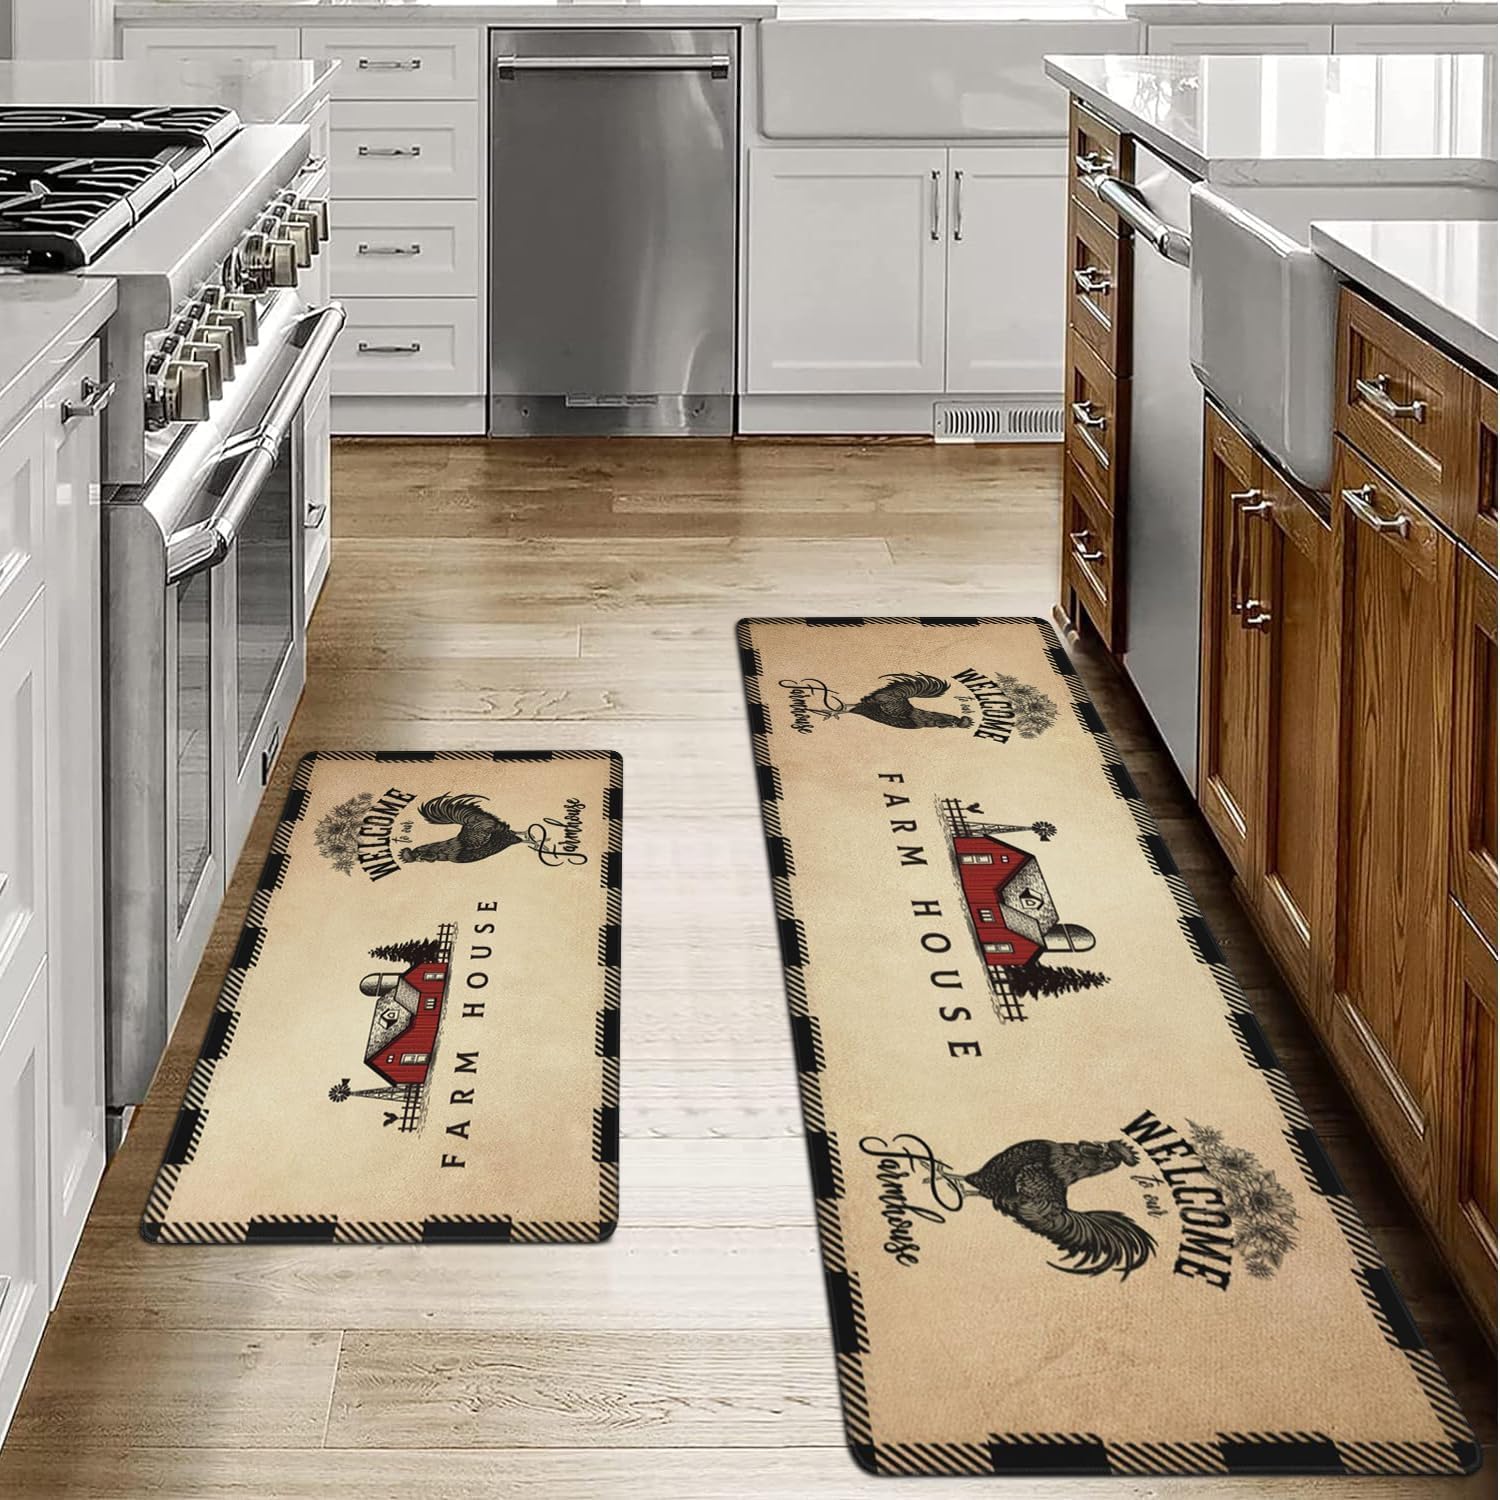 AQQA Farmhouse Kitchen Mats,Thin Rooster Kitchen Rugs Sets of 2, Non Slip Waterproof Kitchen Floor Mats, Home Decor Low-Profile Kitchen Rugs for Laundry, Office, Sink,Desk,19″x35″+19″x59″